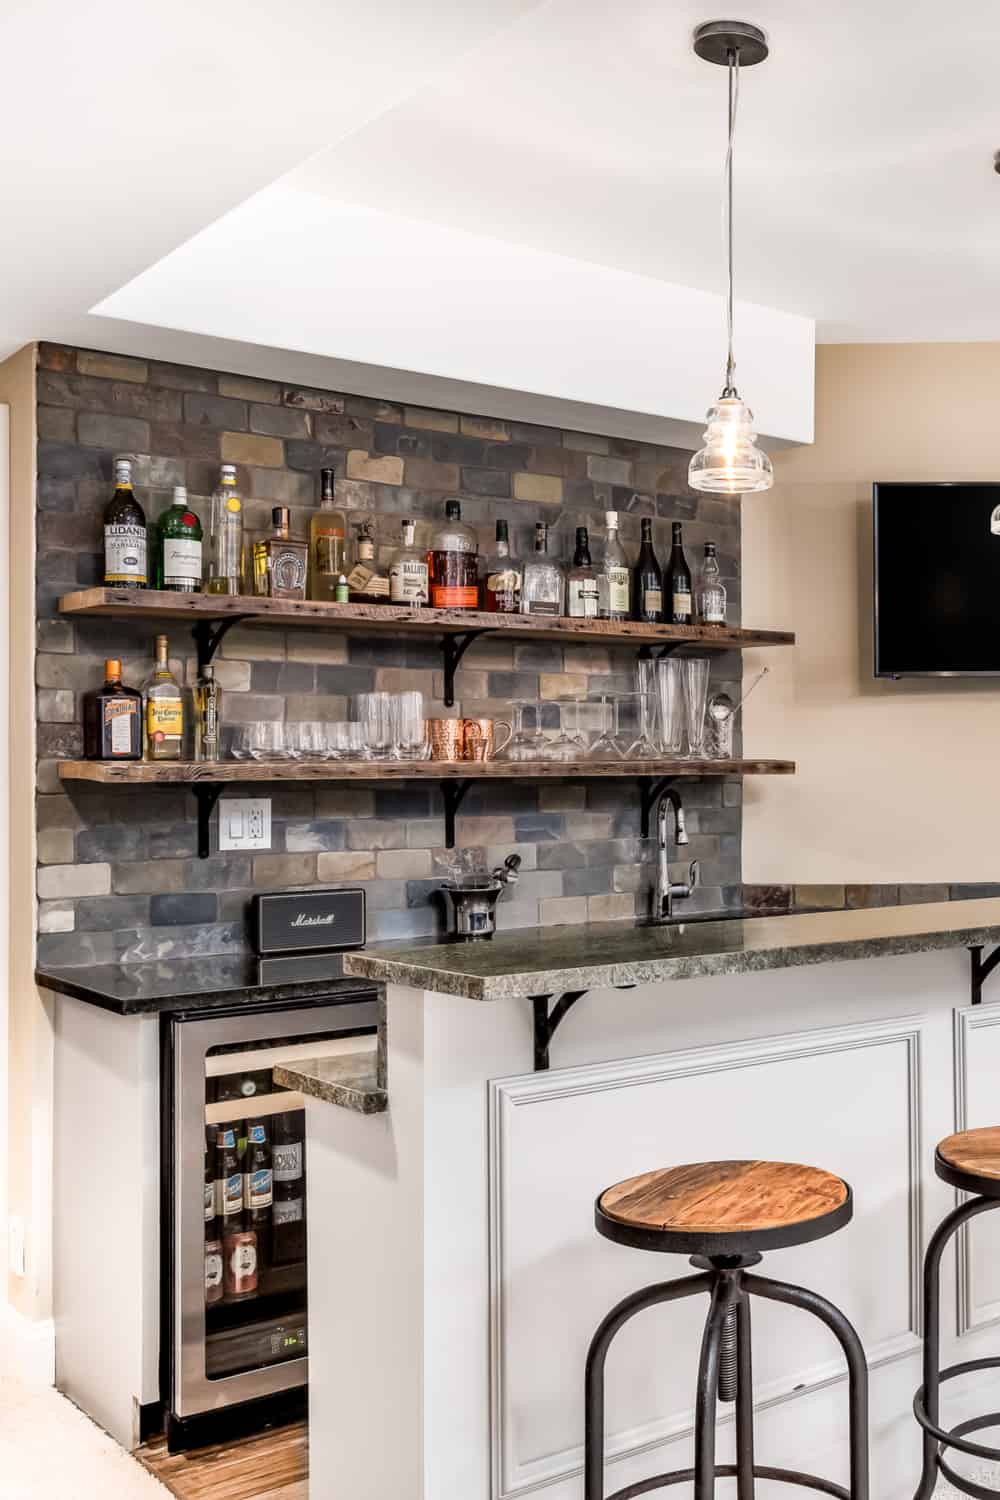 How To Build A Bar In Your Basement